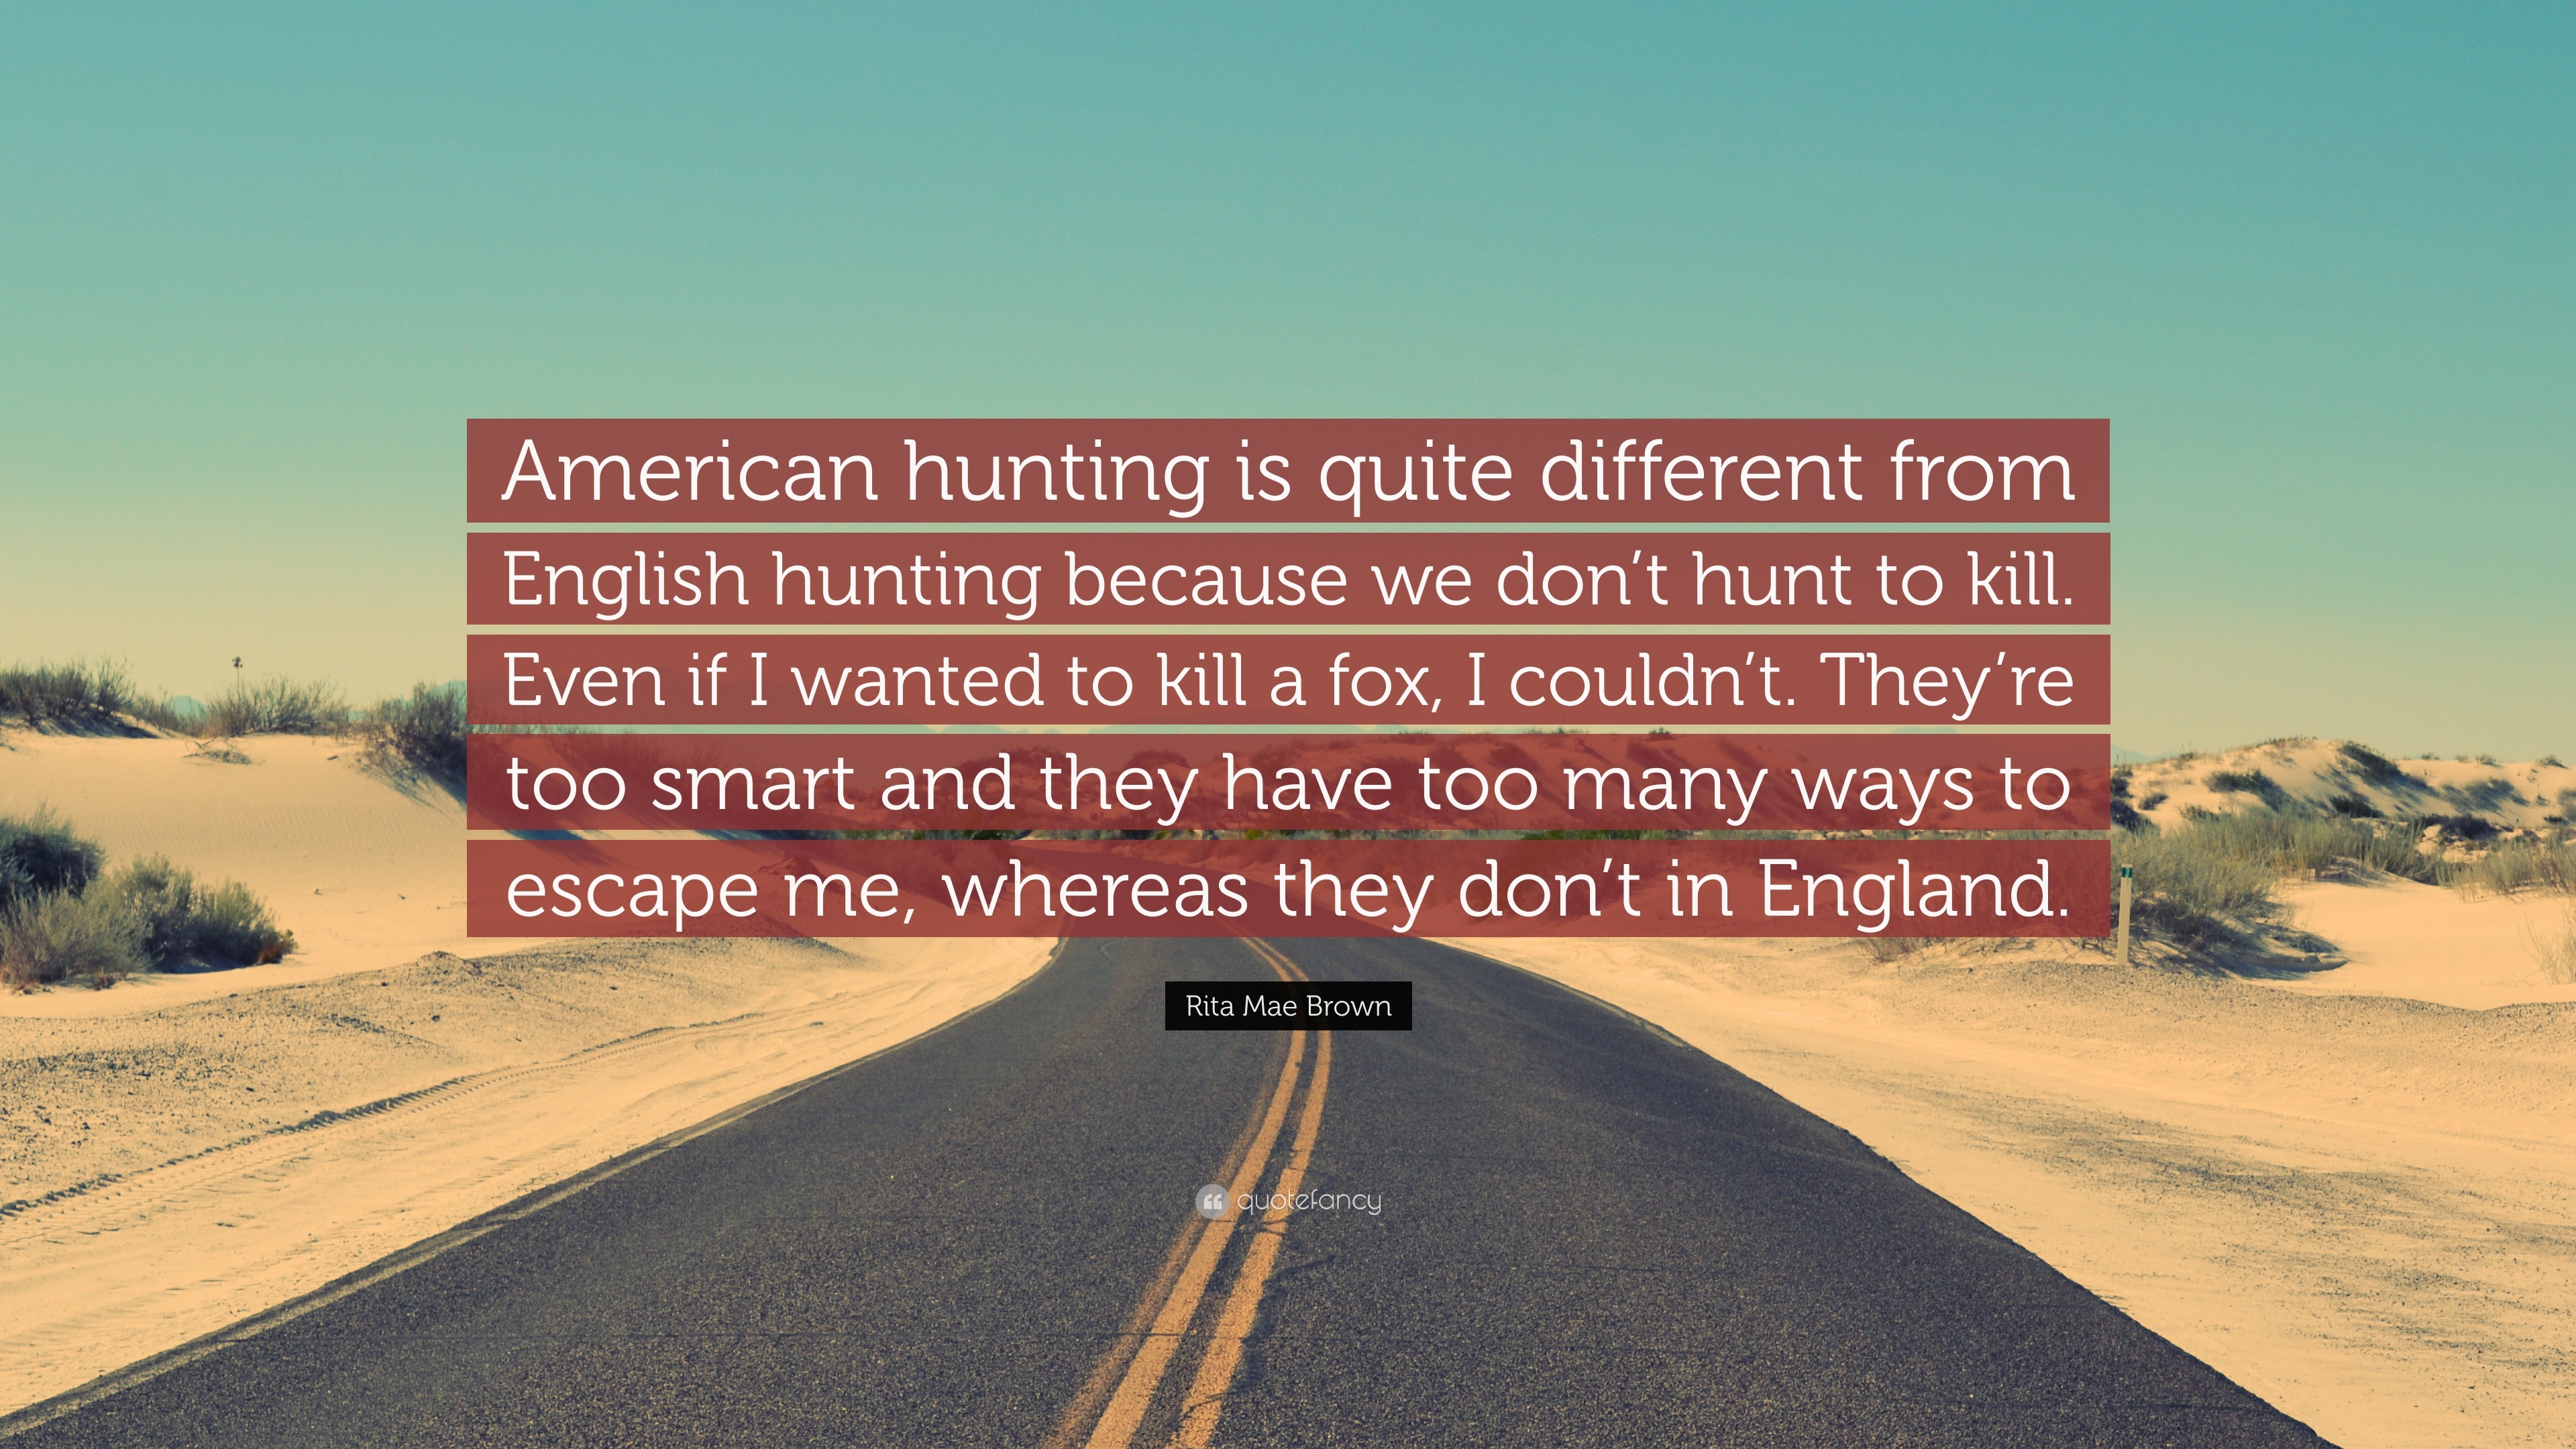 Rita Mae Brown Quote: “American hunting is quite different from English  hunting because we don't hunt to kill. Even if I wanted to kill a fox, ”